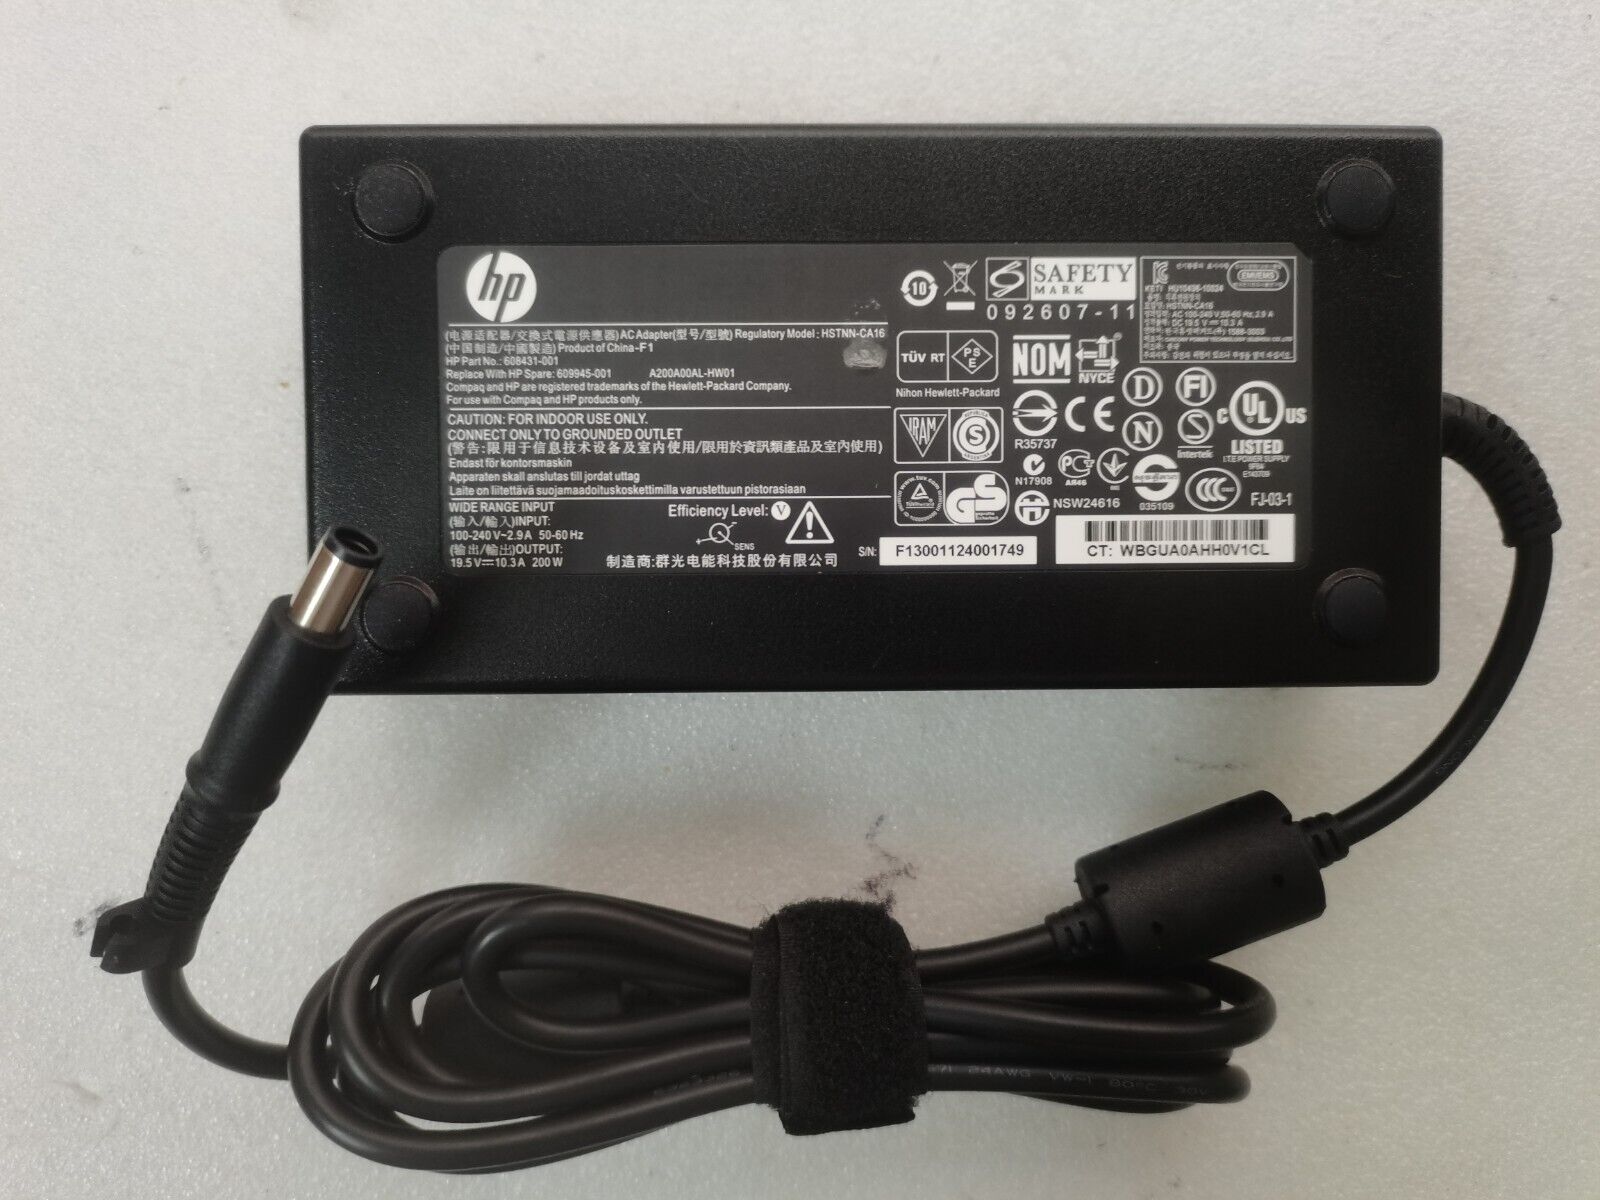 NEW 19.5V 10.3A 200W 608431-001 AC Charger for HP Z2 mini G4 workstation Genuine